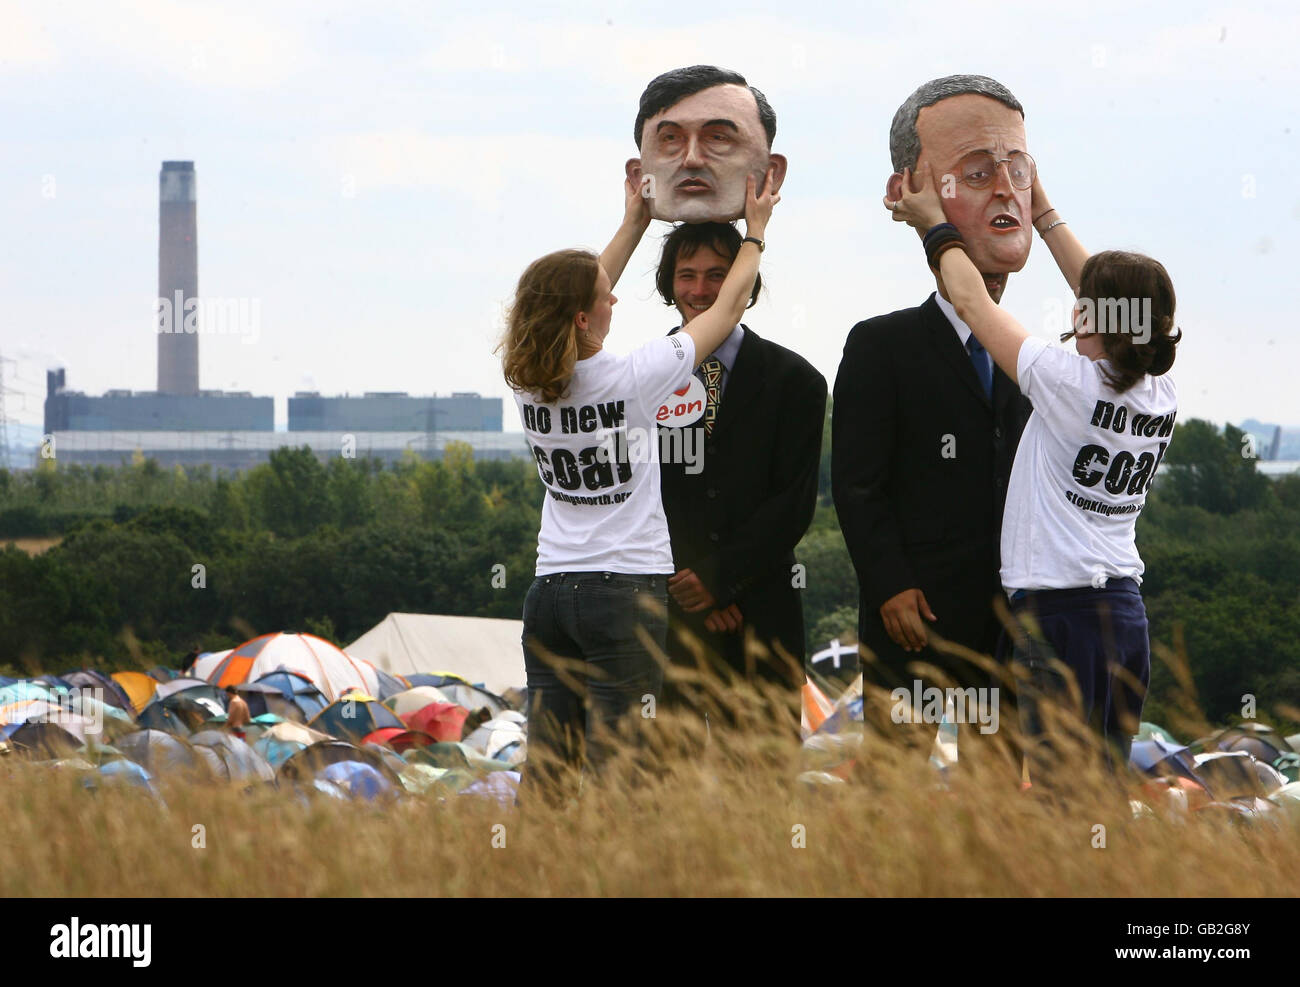 Caricatures of Prime Minister Gordon Brown (left) with Hilary Benn, Minister for the Environment, Food and Rural Affairs are prepared for a photocall at the Climate Camp near Kingsnorth Power Station in Kent, as campaigners protest against the redevelopment of the coal fired power station. Stock Photo